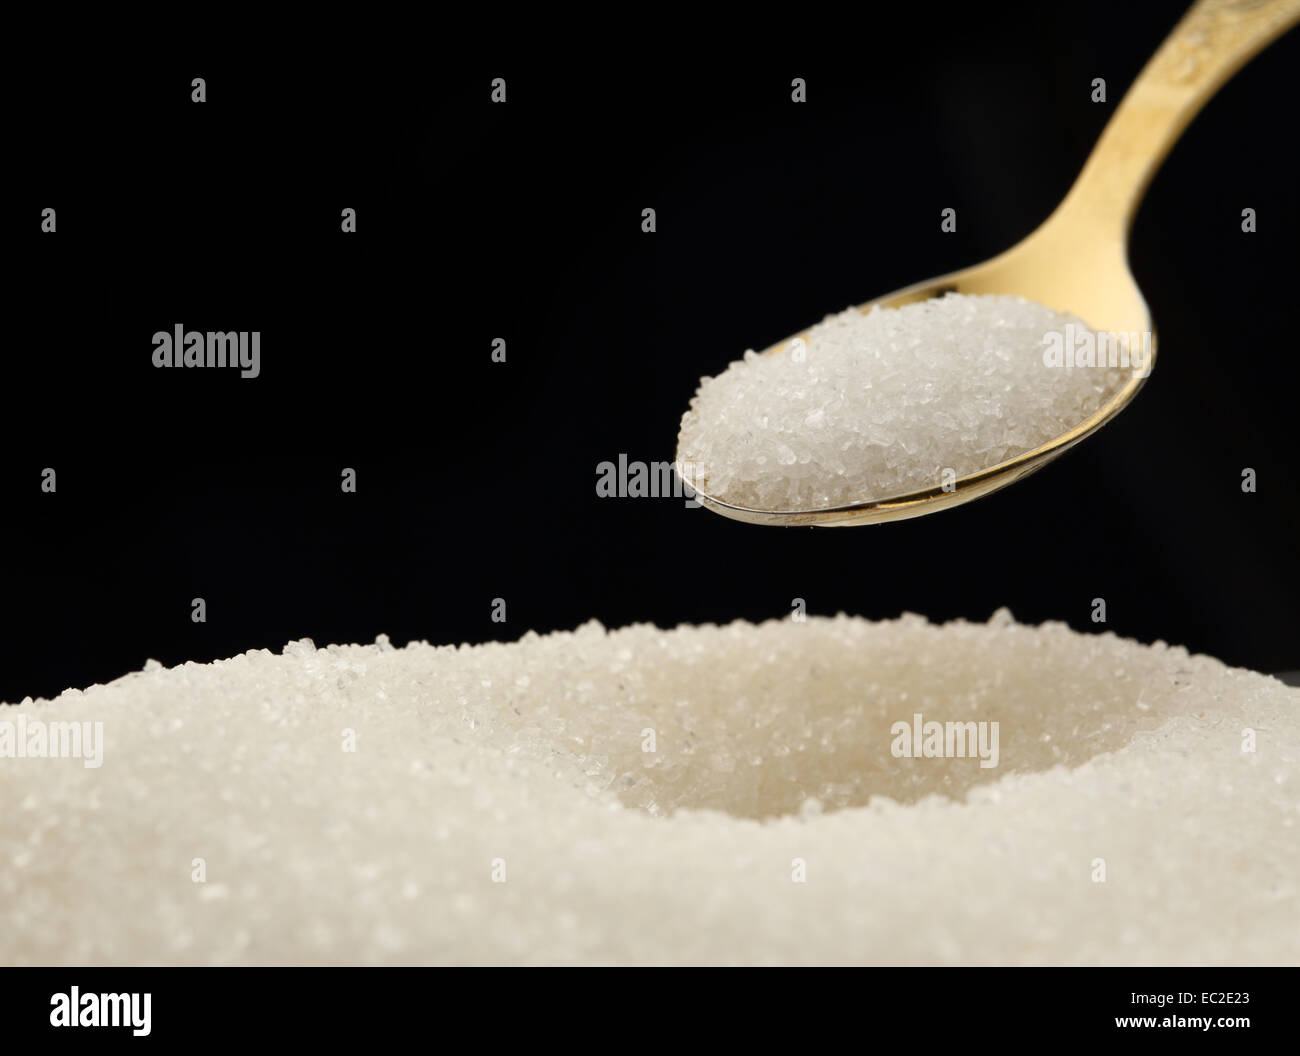 Heap of white sugar and spoon Stock Photo